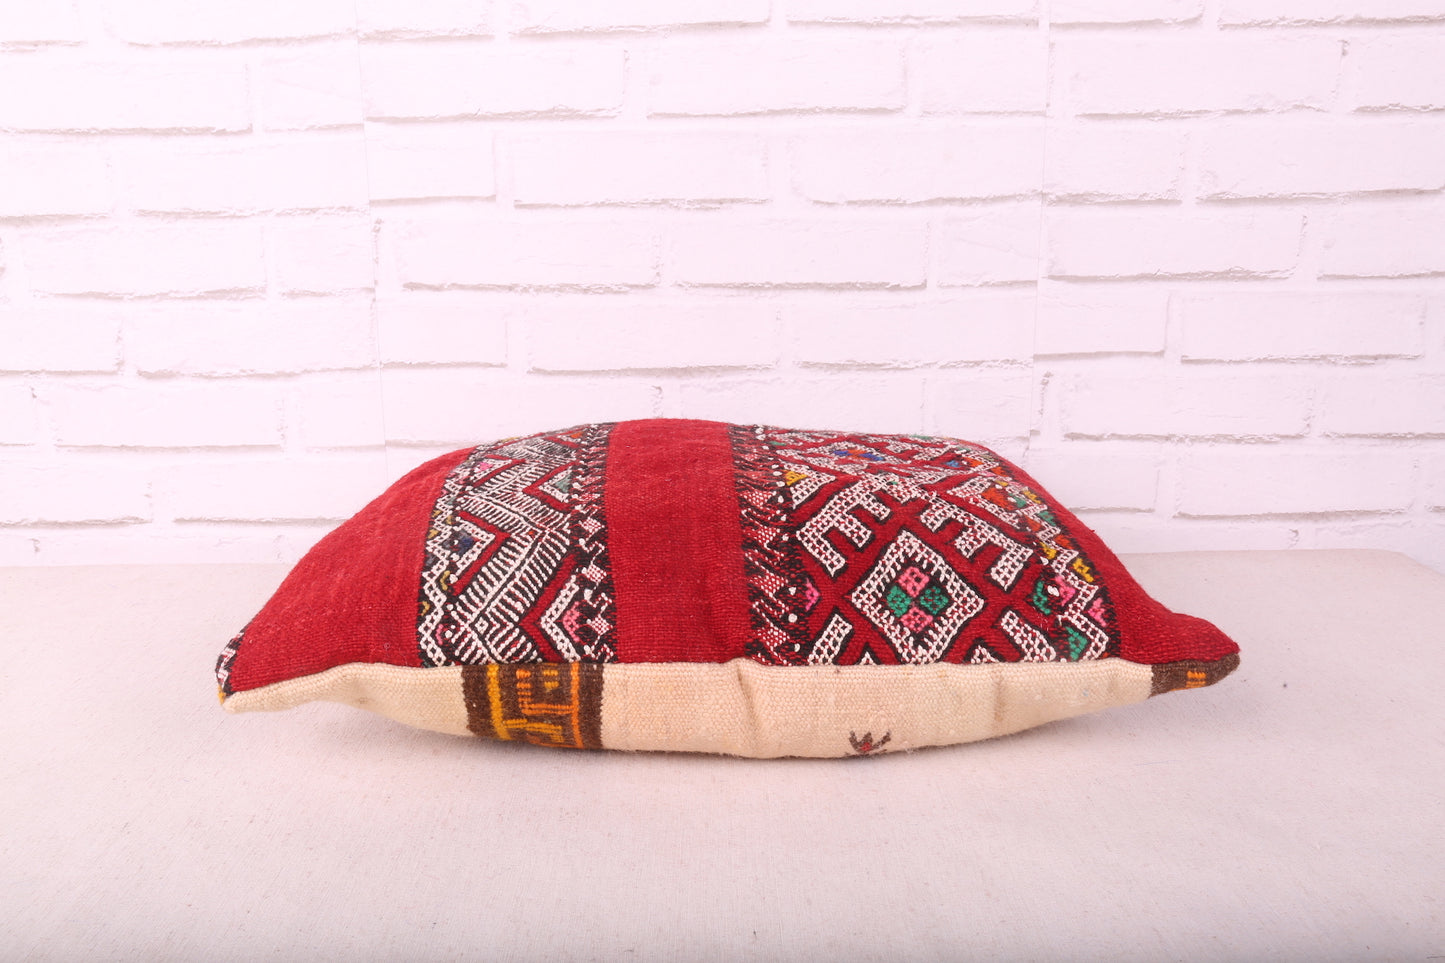 Moroccan red pillow 16.9 inches X 20 inches